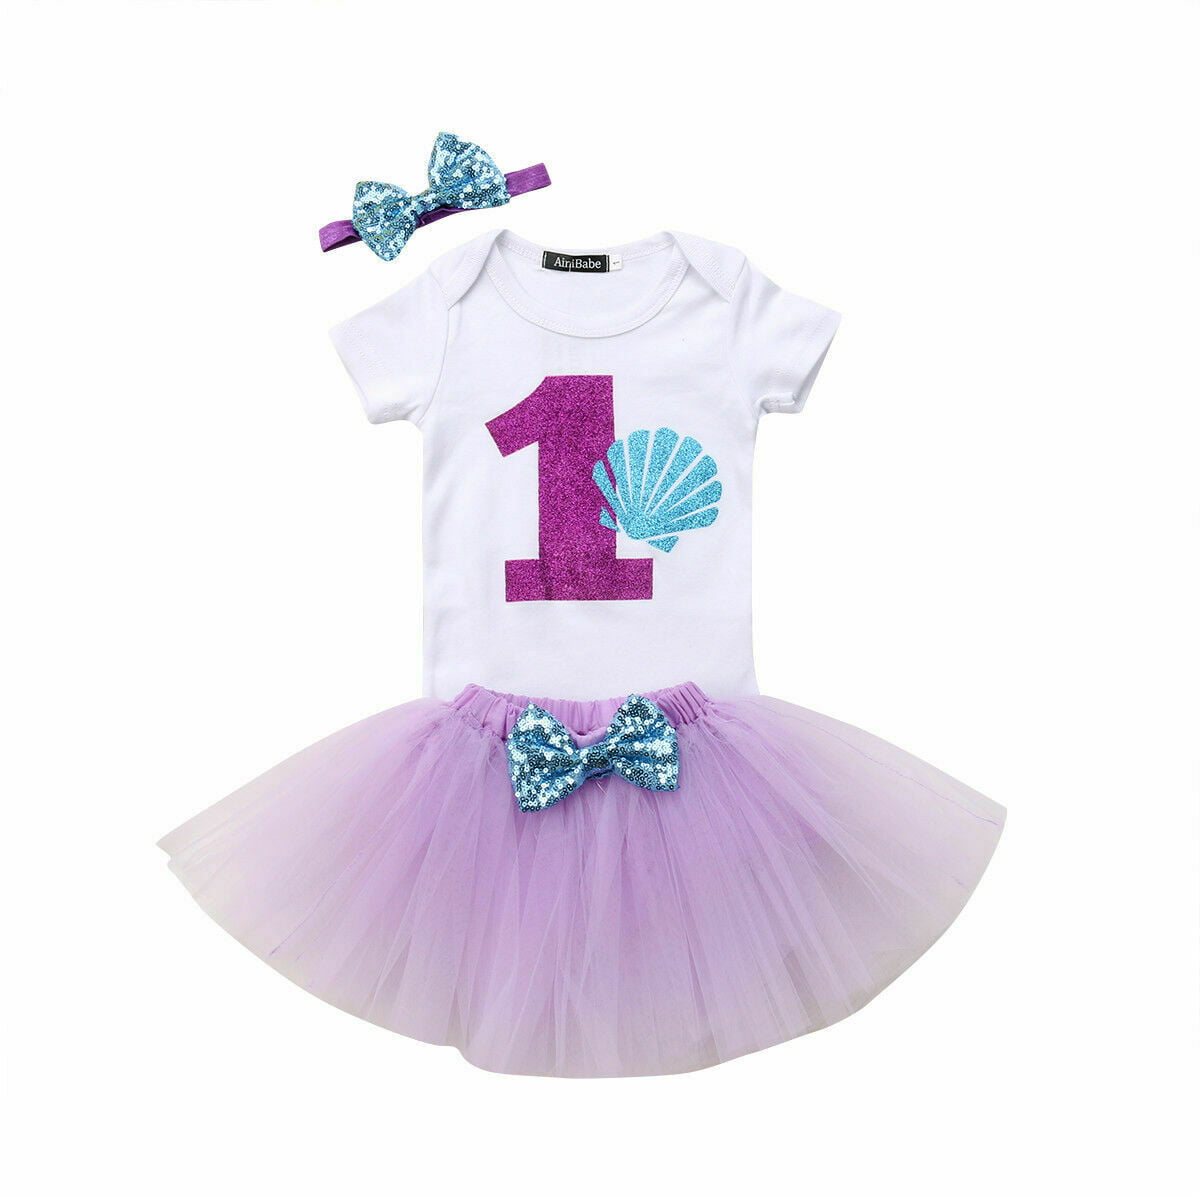 1st birthday party outfit